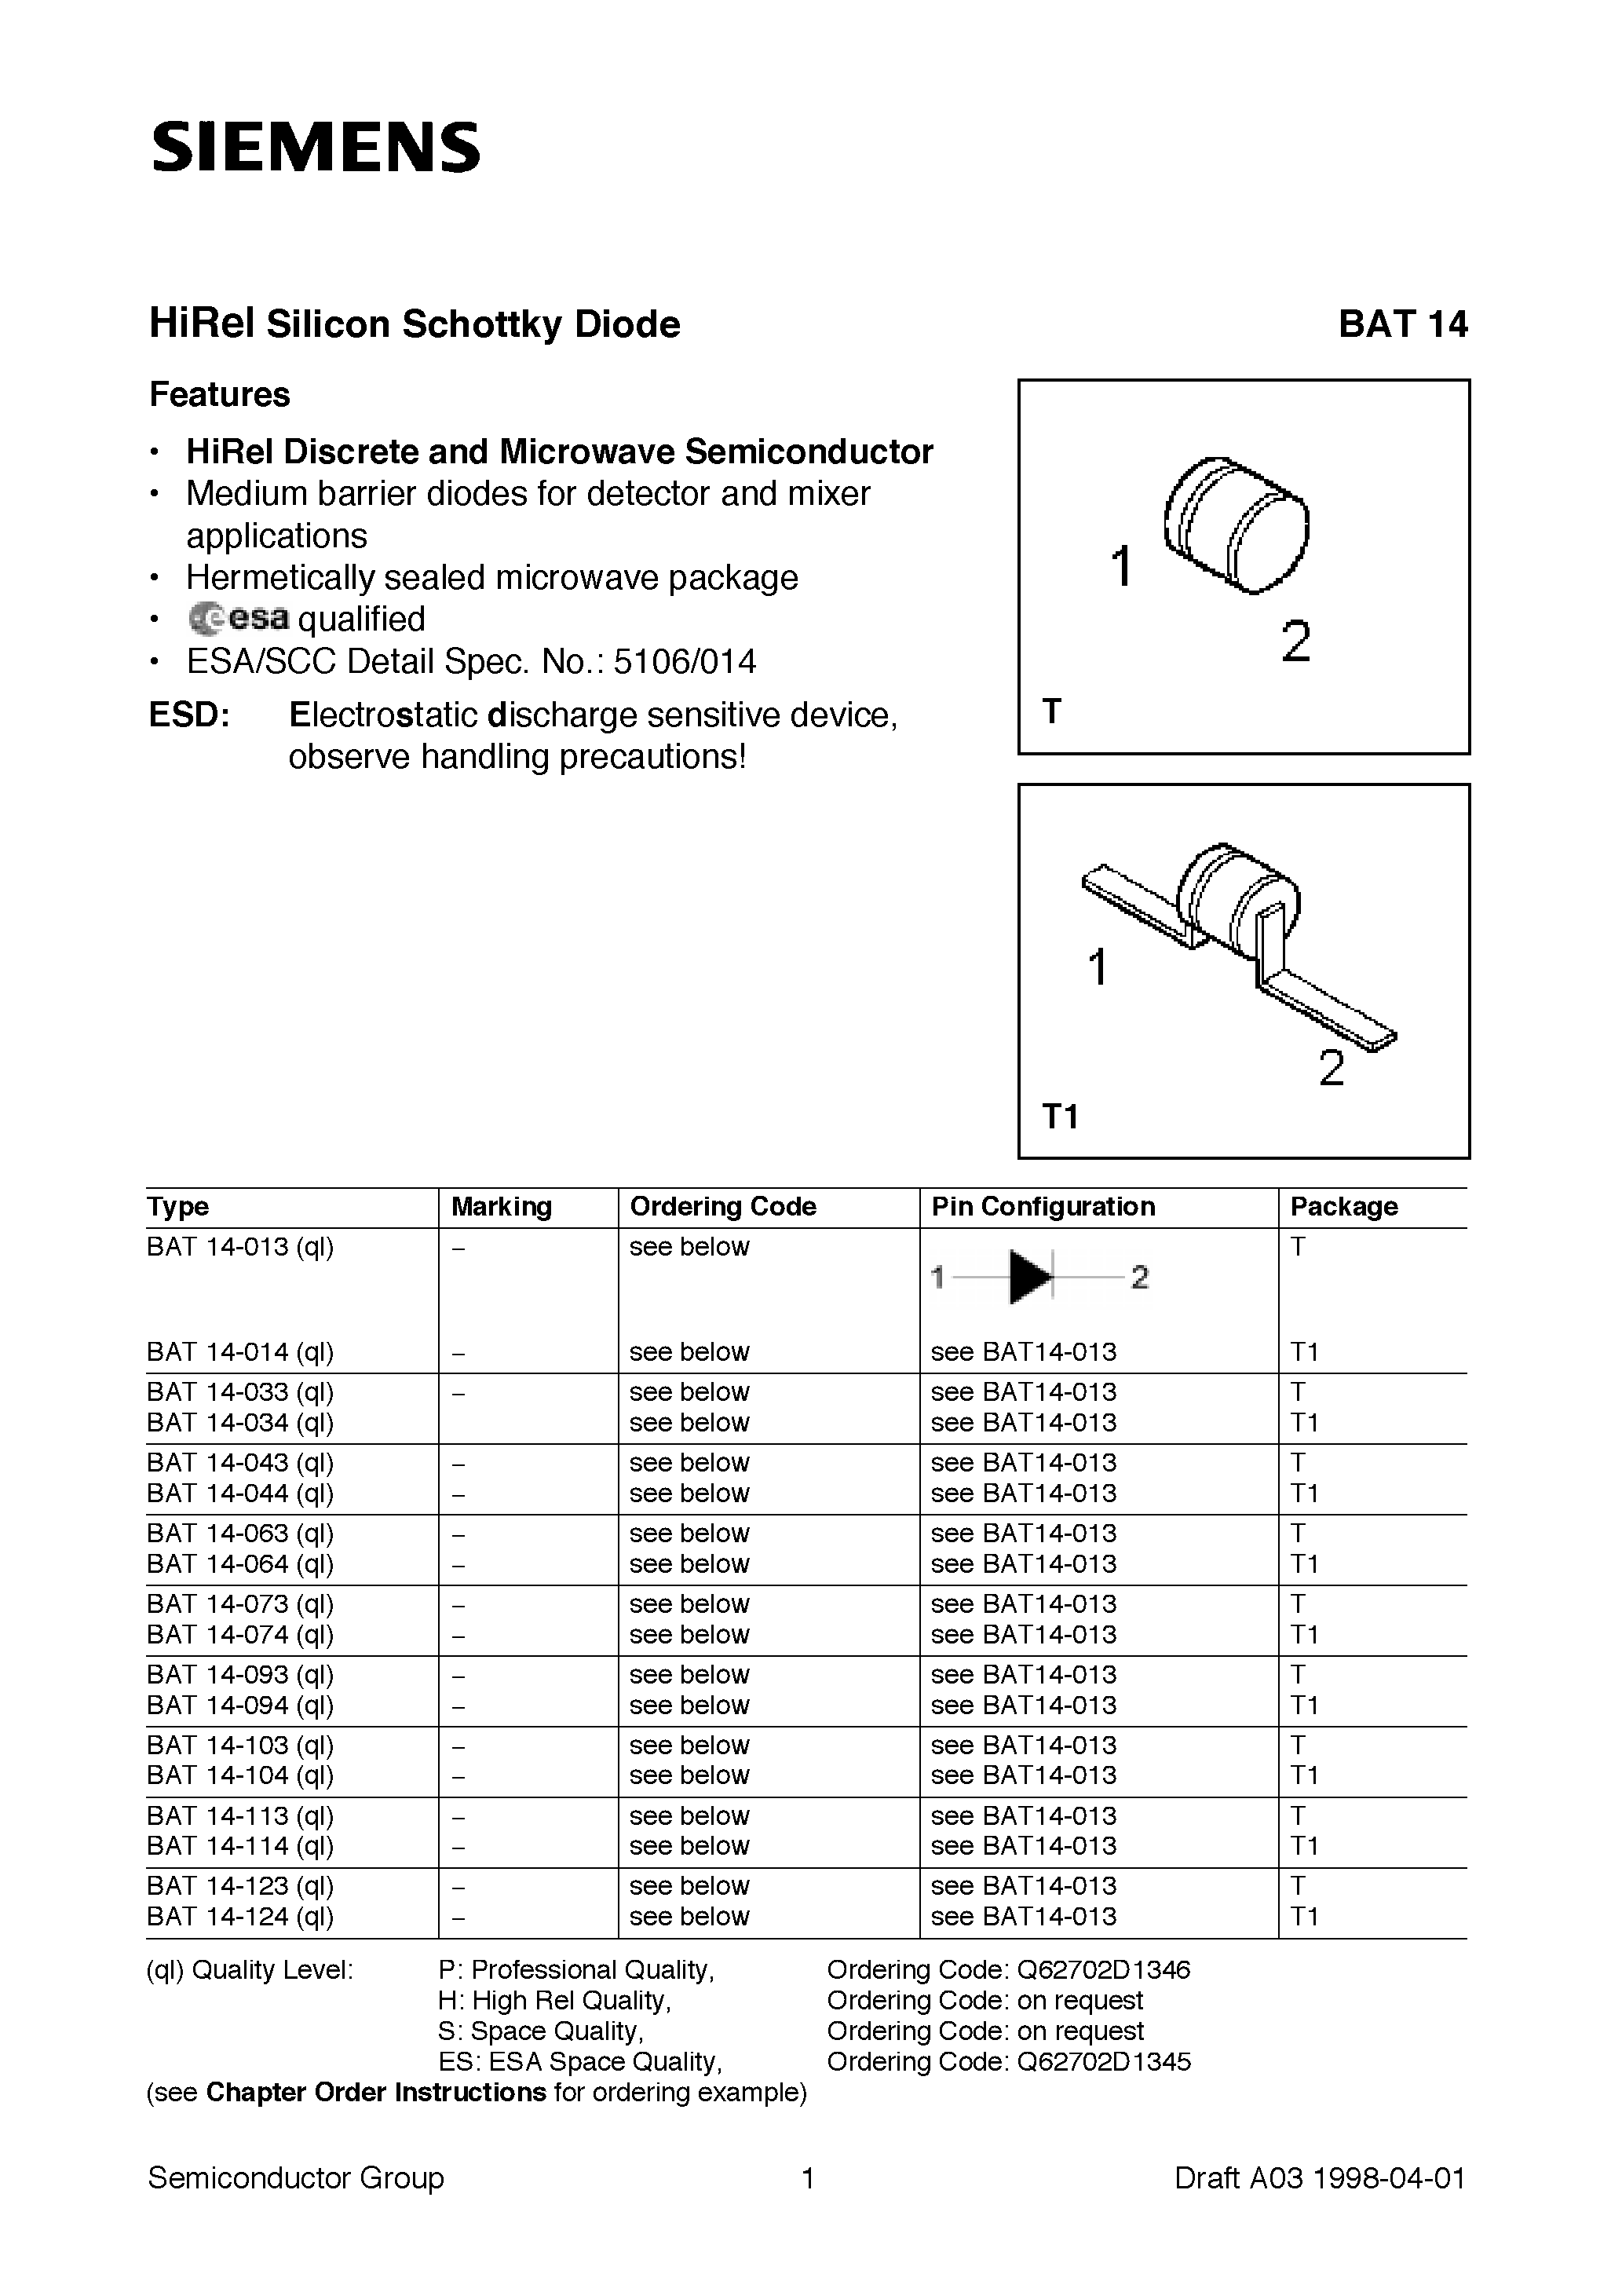 Datasheet BAT14-043 - HiRel Silicon Schottky Diode (HiRel Discrete and Microwave Semiconductor Medium barrier diodes for detector and mixer applications) page 1